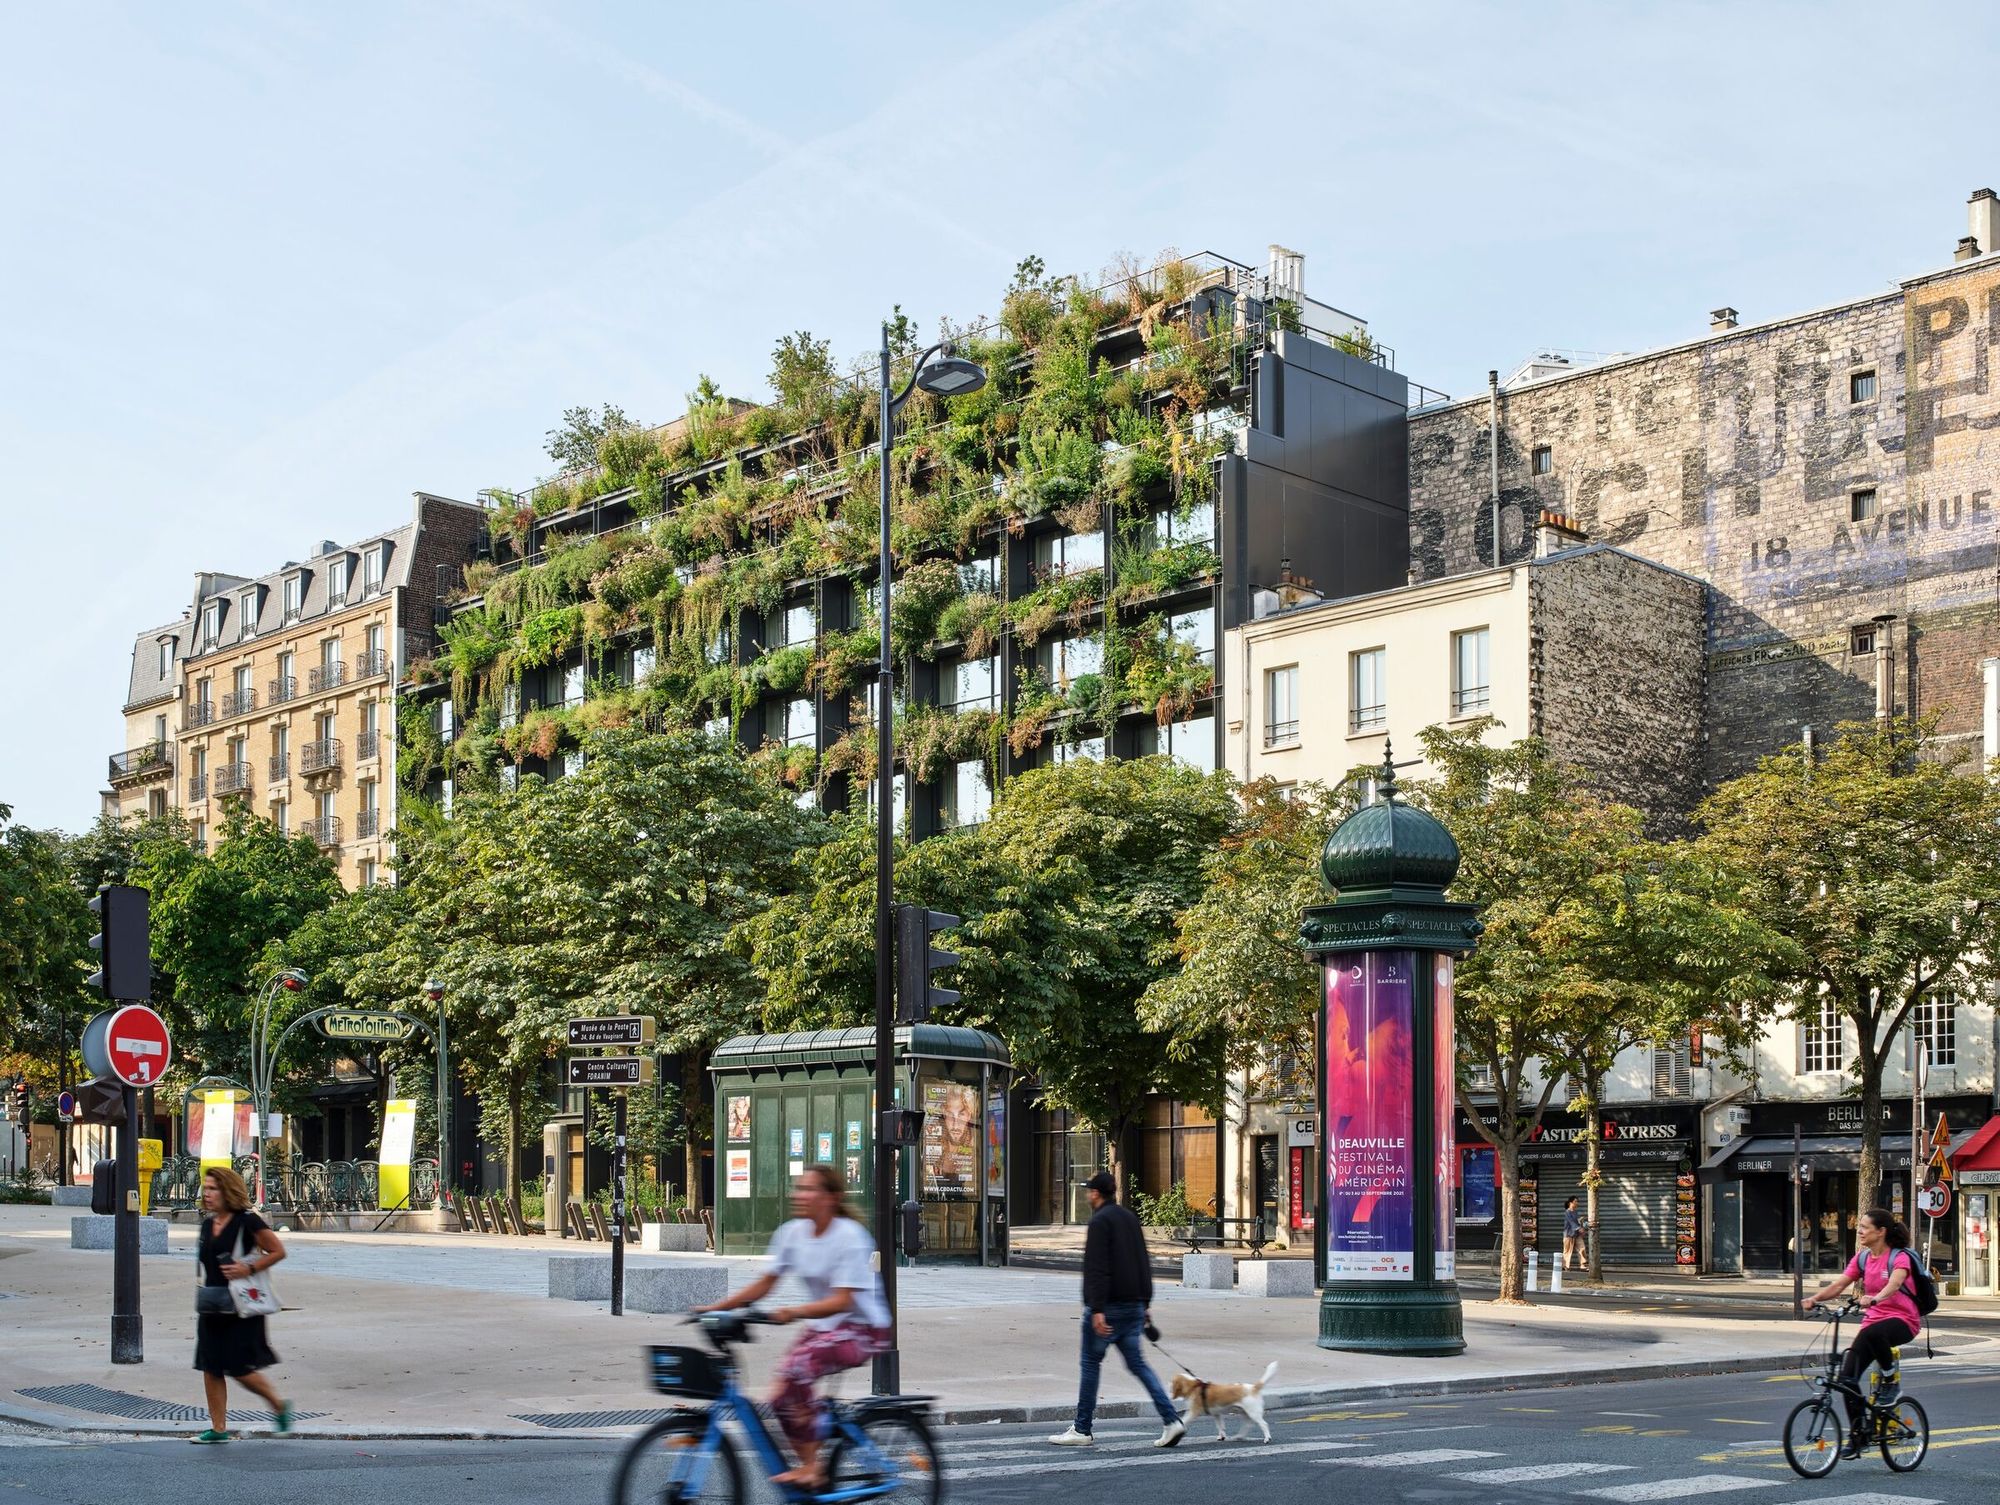 Paris gets closer to nature with this "living building"